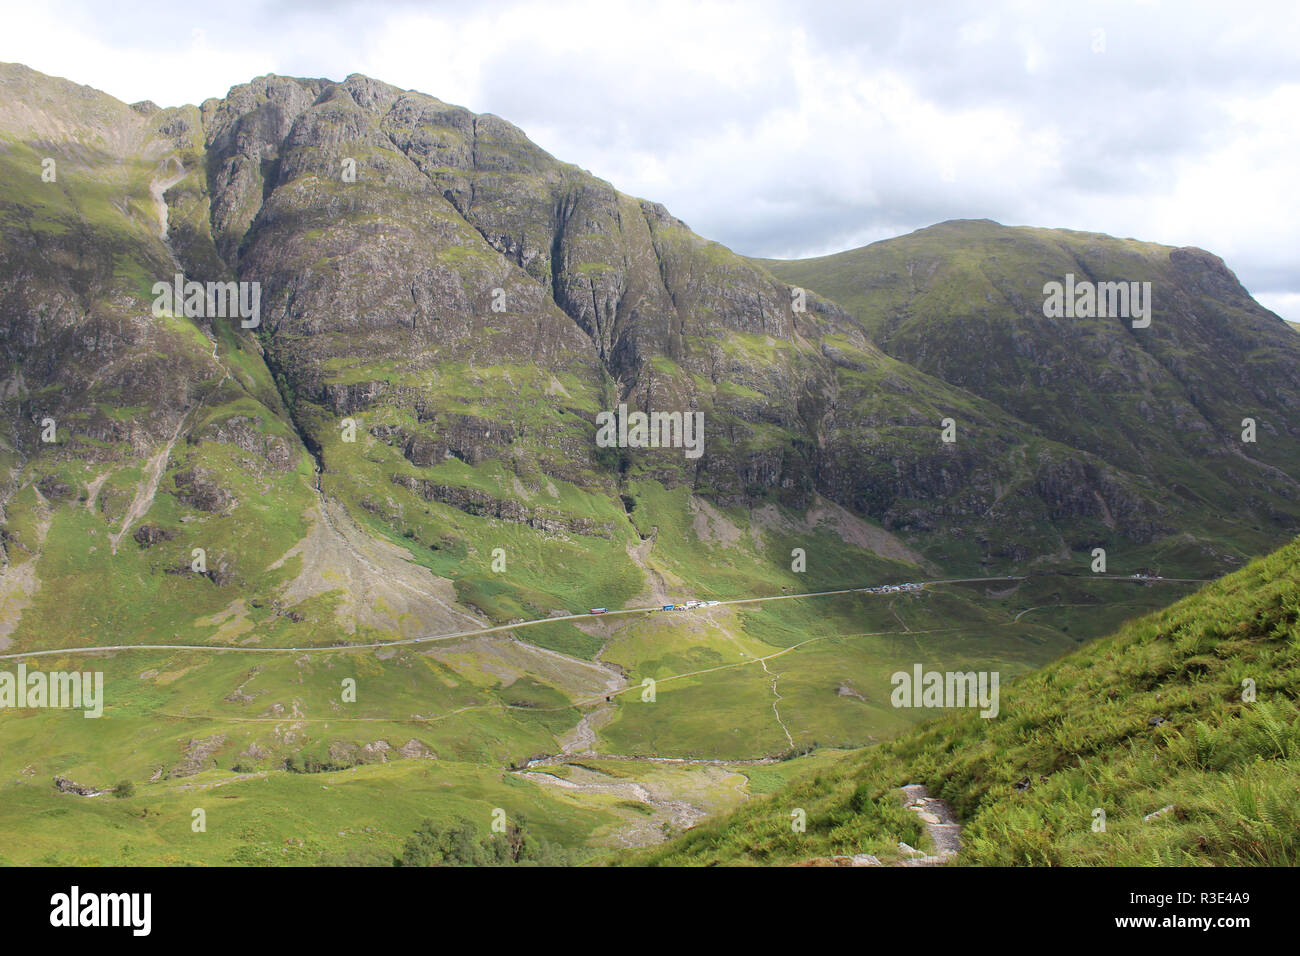 View of the famous Glencoe pass and A82 road in the Highlands of Scotland, from high above, in the summertime. Stock Photo